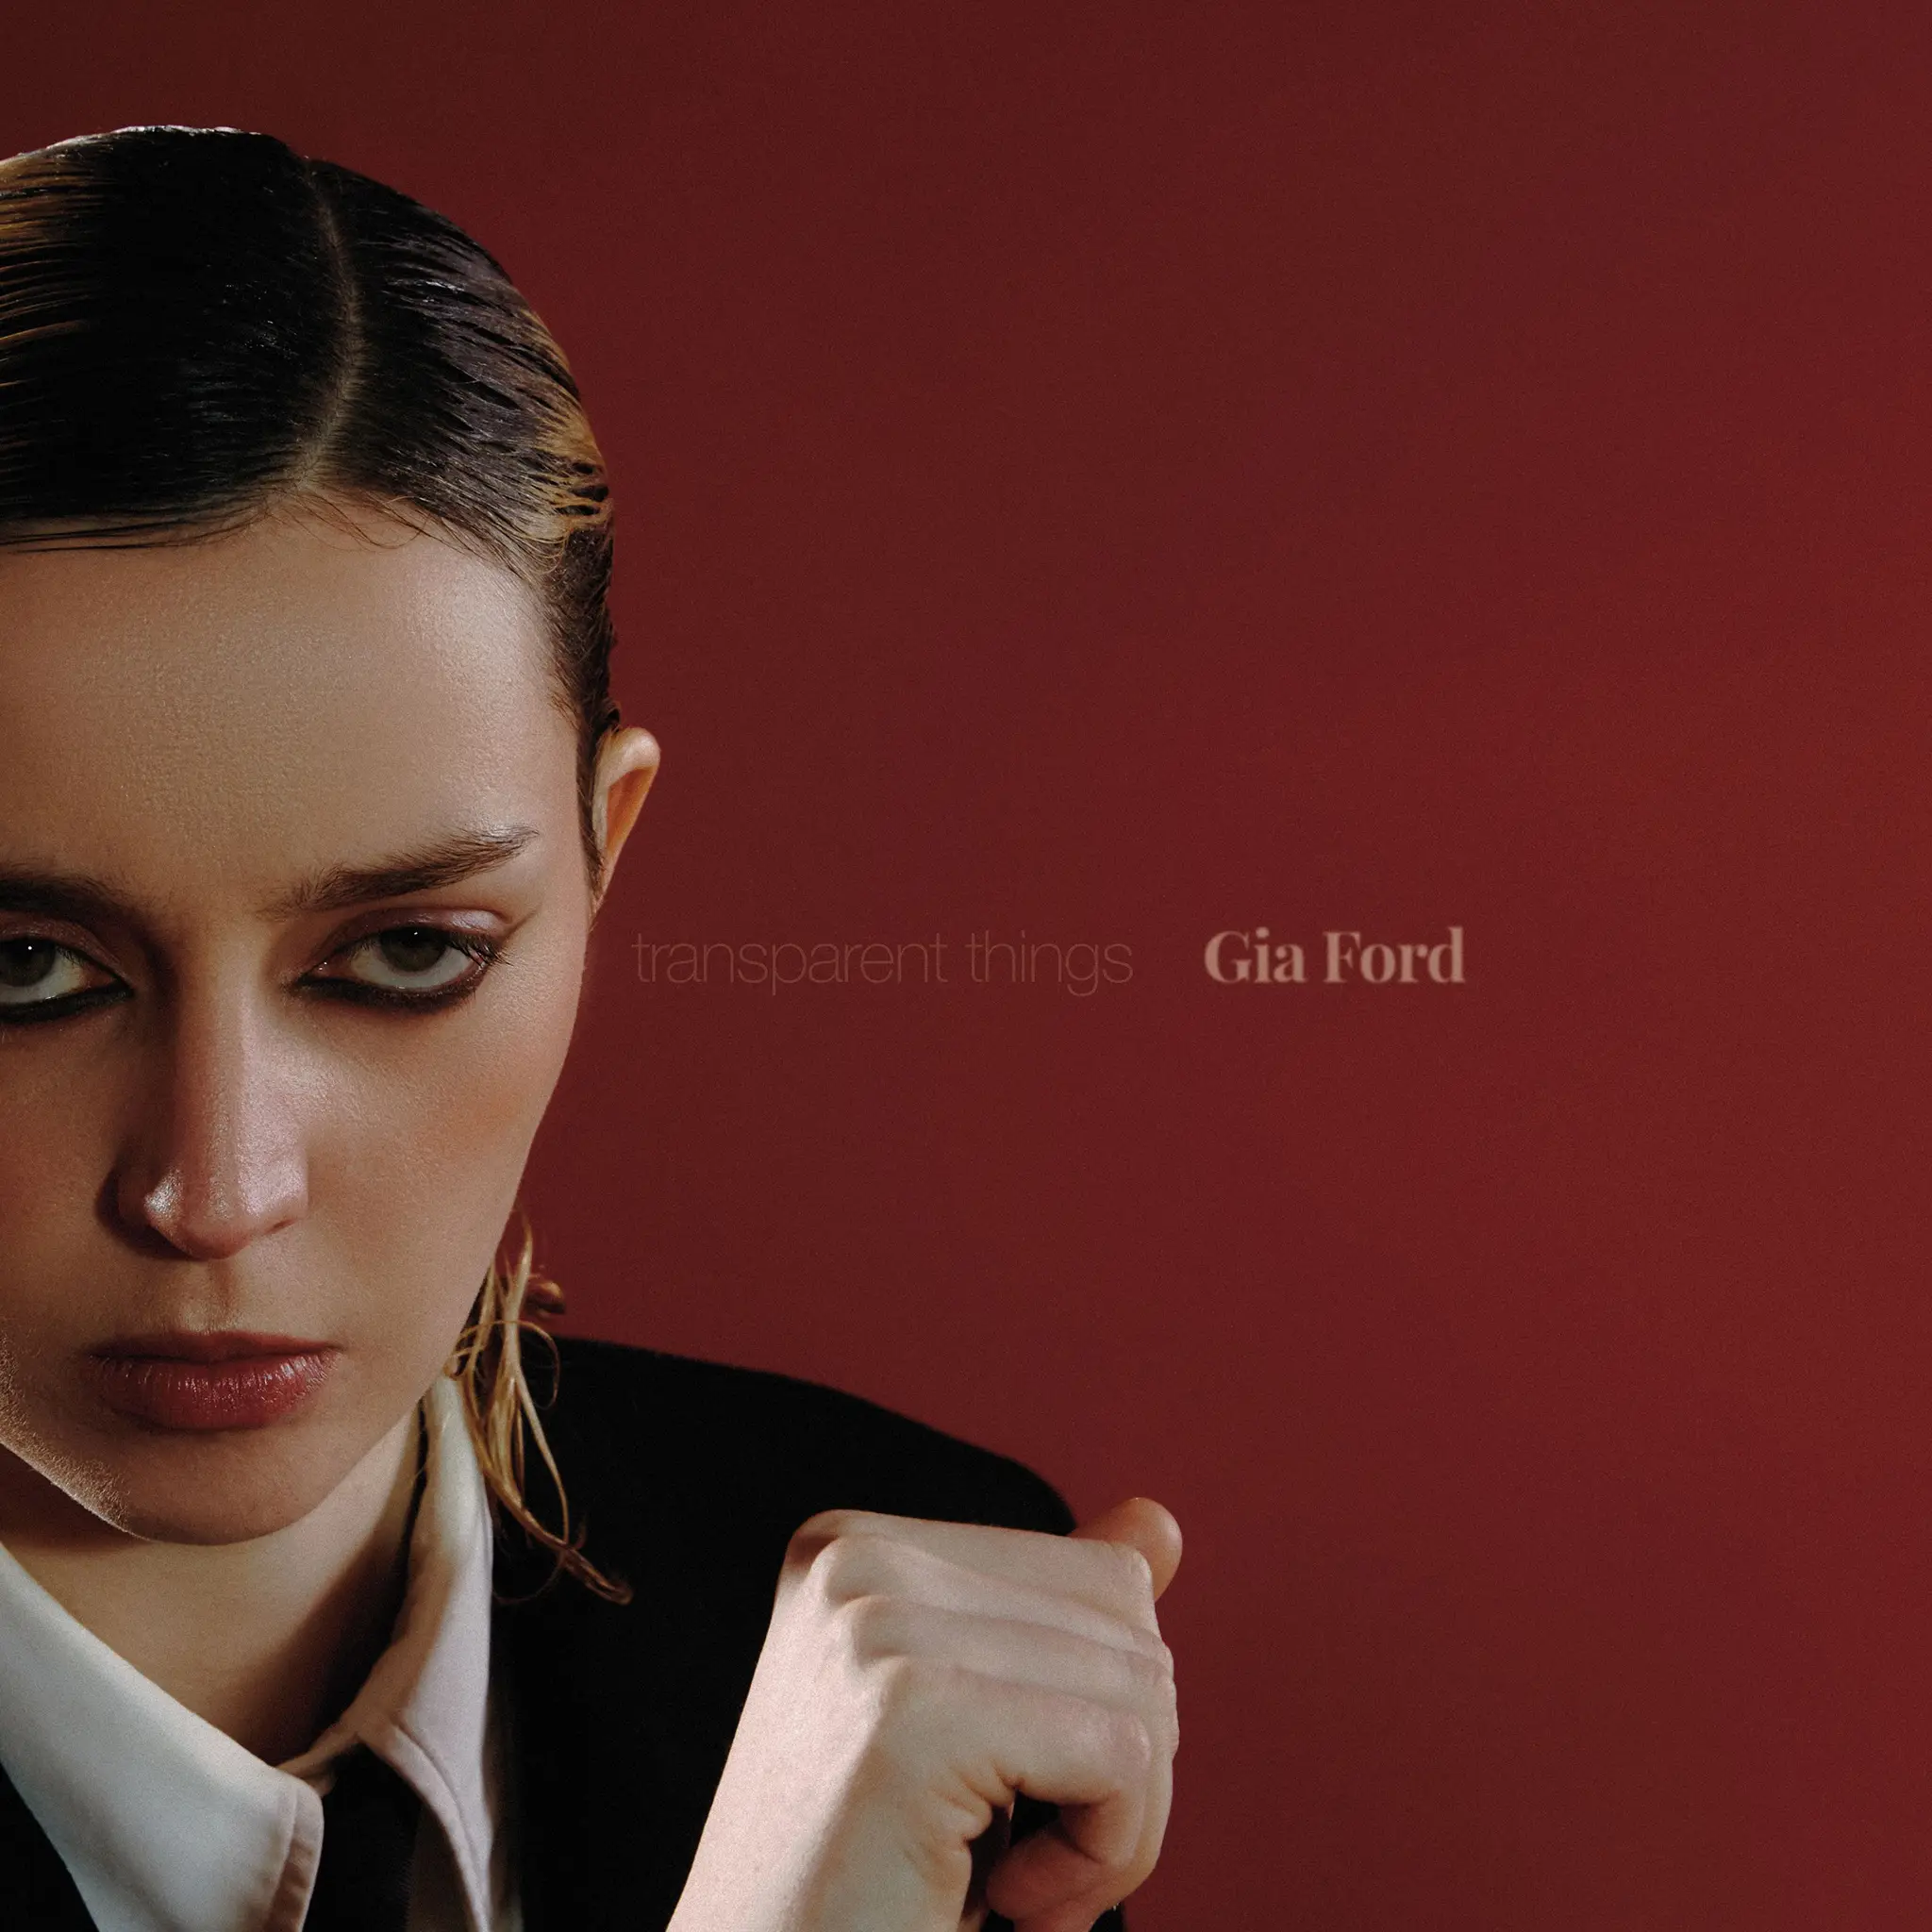 <strong>Gia Ford - Transparent Things</strong> (Vinyl LP - clear)